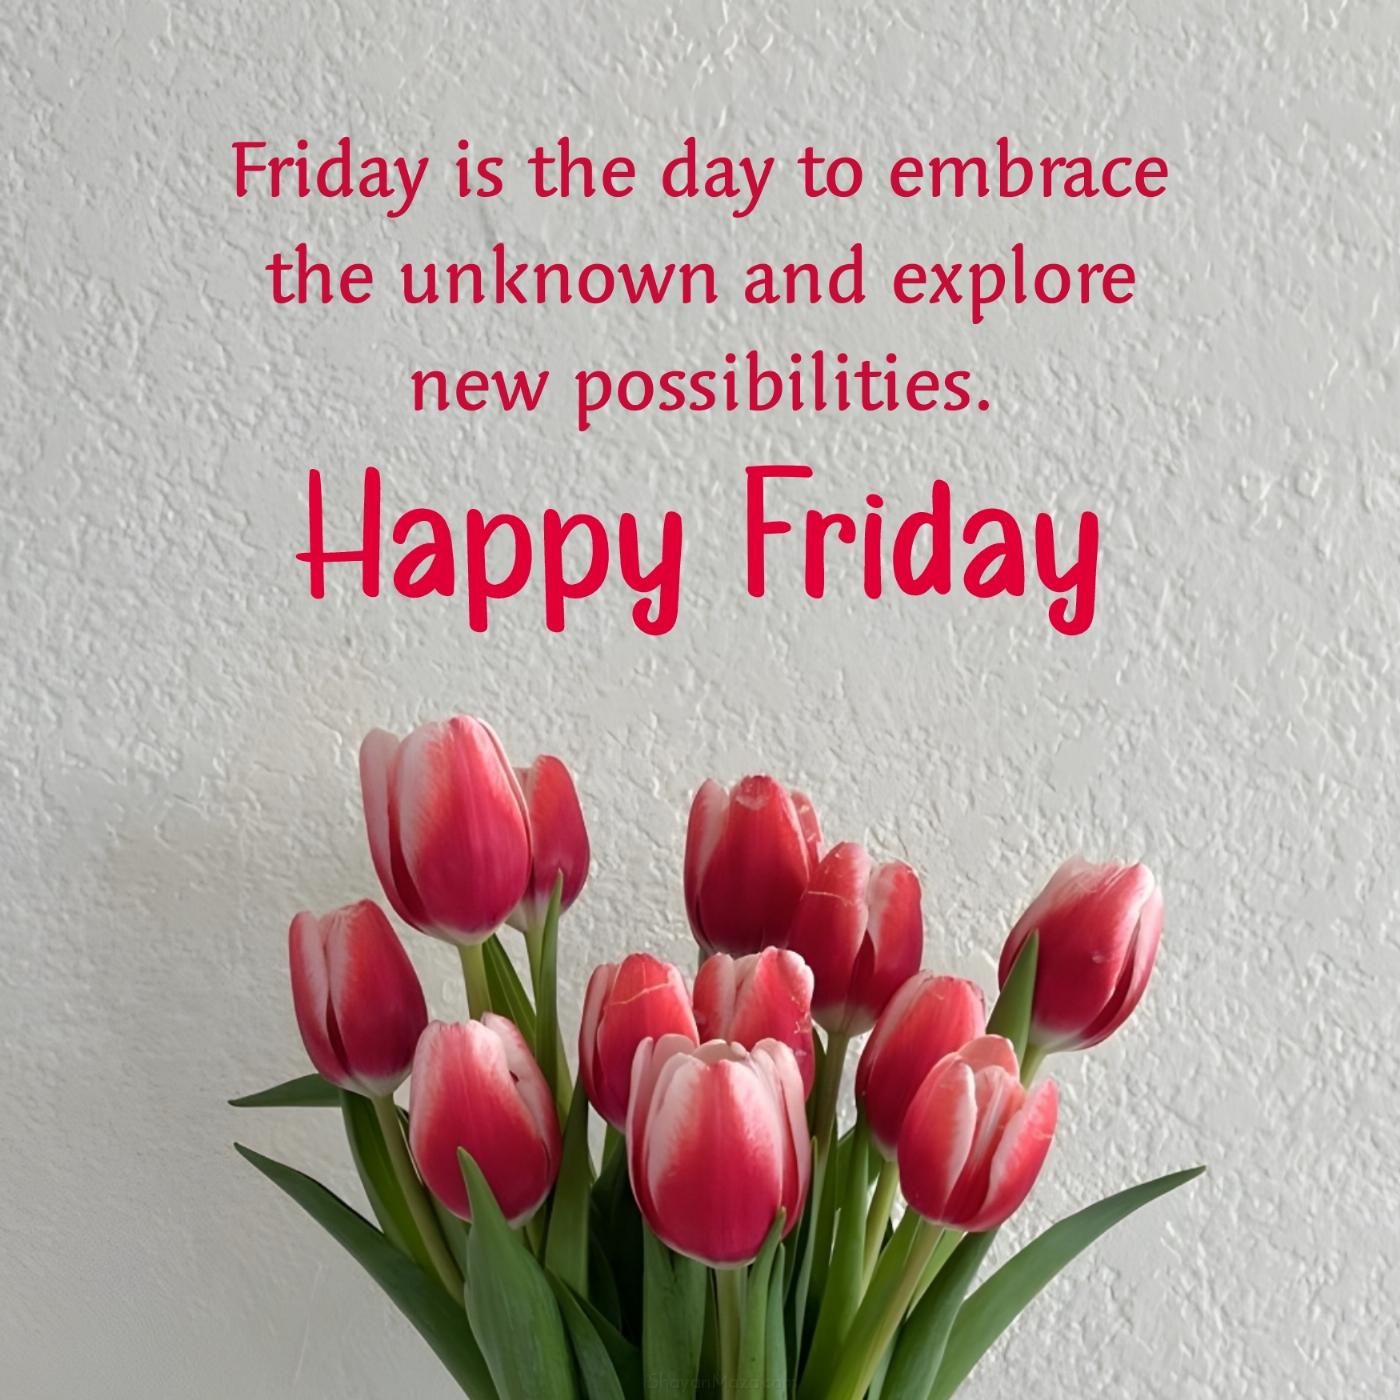 Friday is the day to embrace the unknown and explore new possibilities